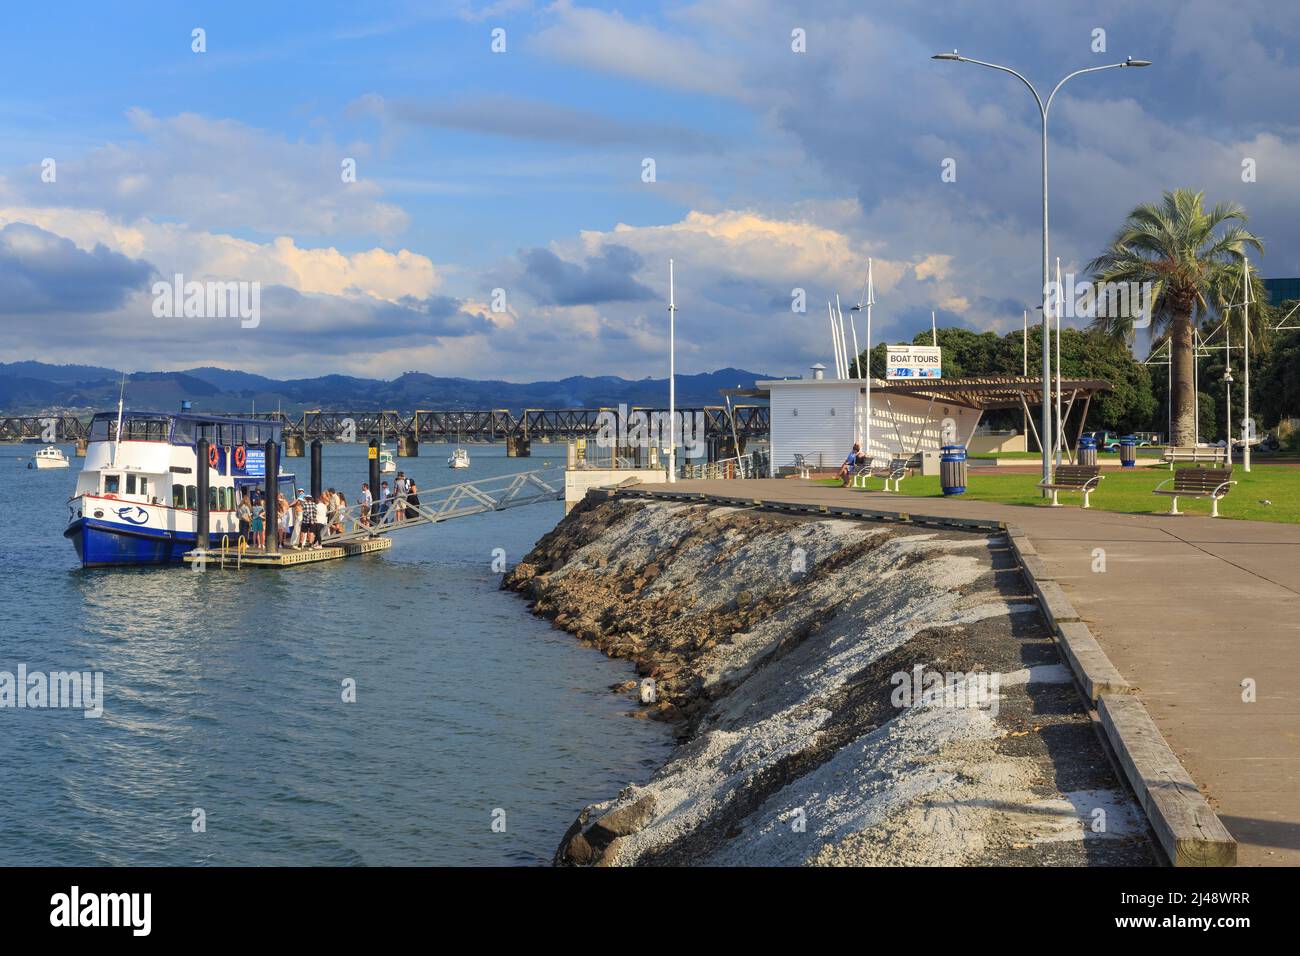 Tauranga, New Zealand. View of a waterfront park and a tour boat, the 'Kewpie', docked in Tauranga Harbour Stock Photo